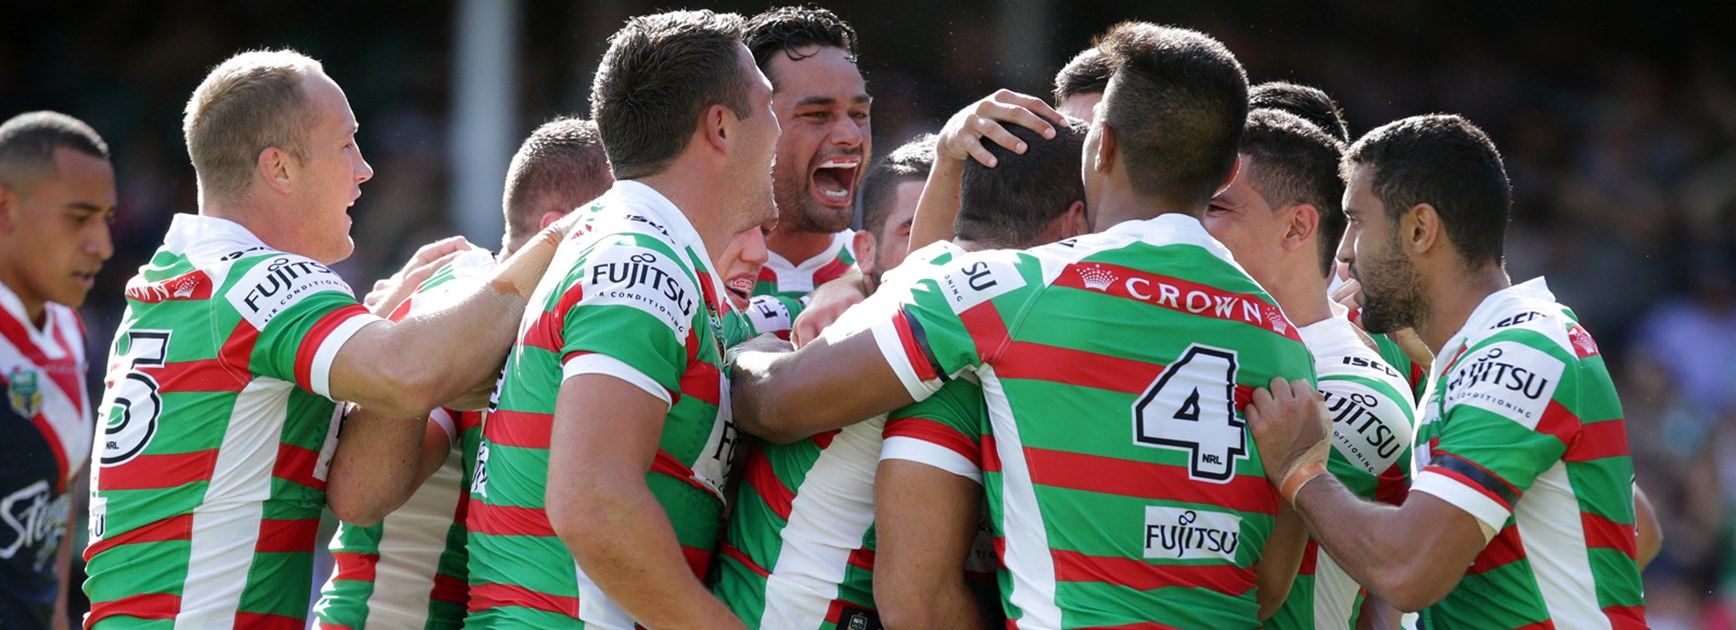 Rabbitohs players celebrate during their big win over the Roosters in Round 1.